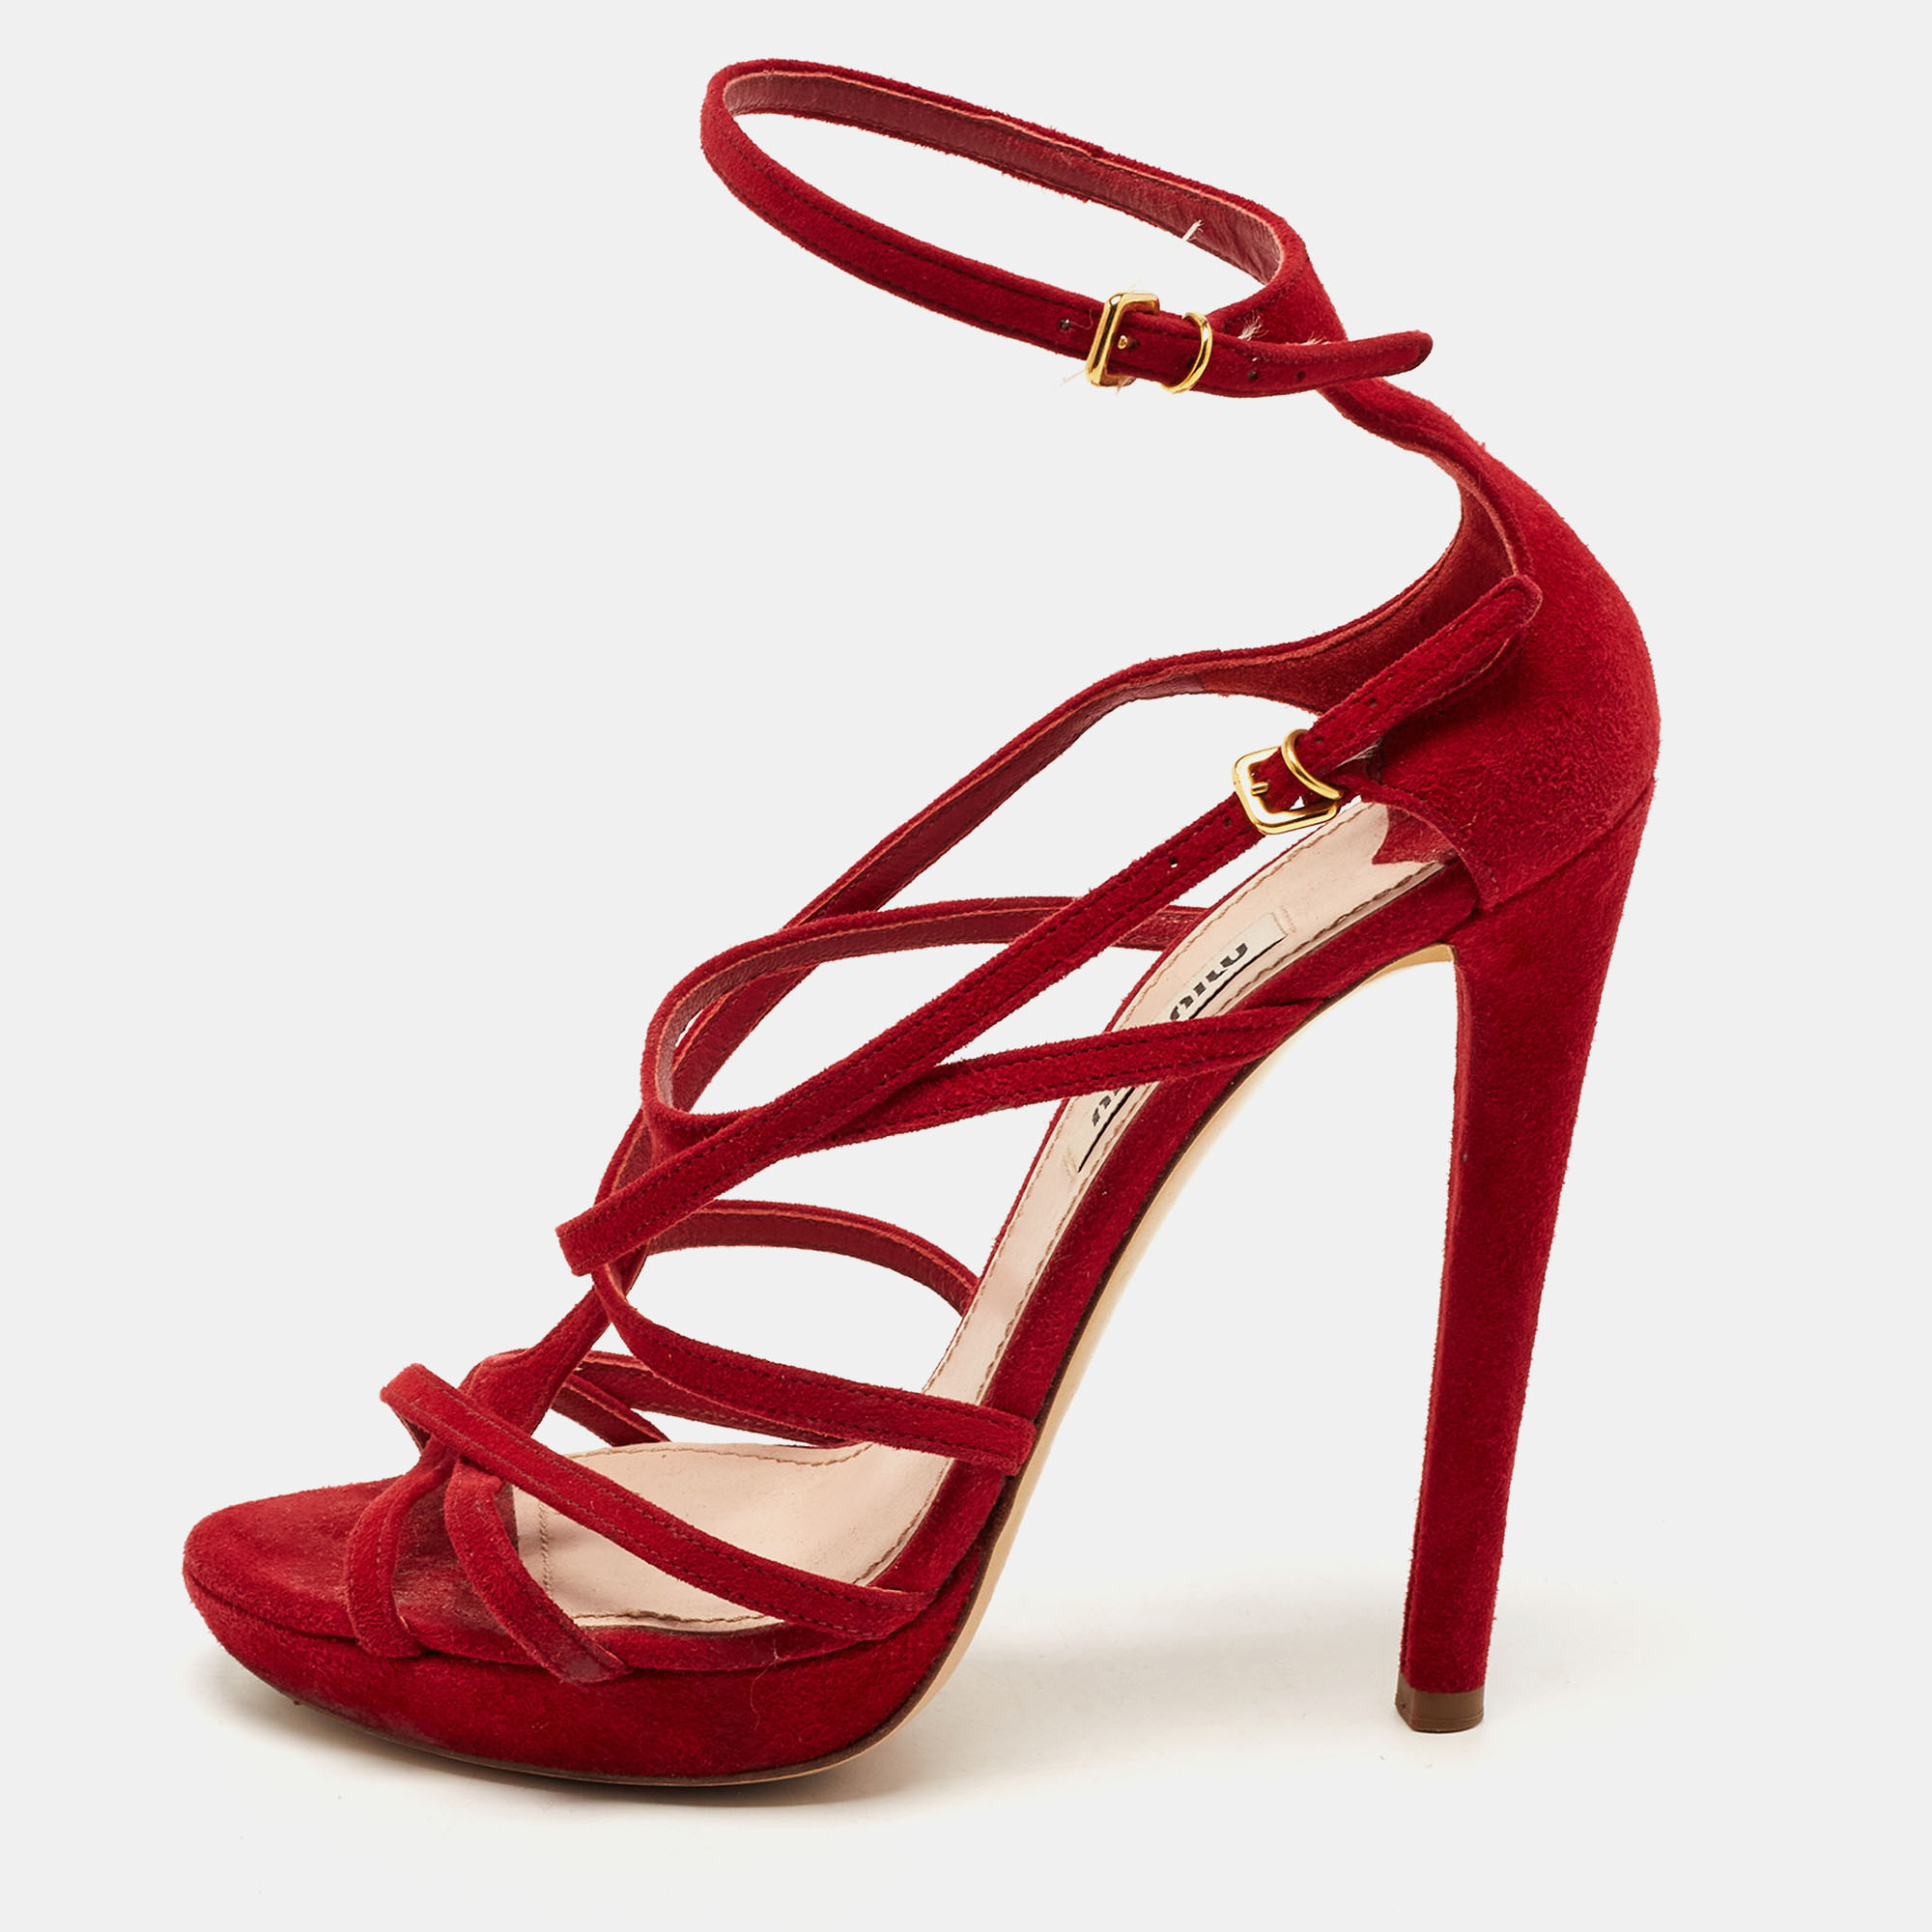 Pre-owned Miu Miu Red Suede Strappy Platform Sandals Size 36